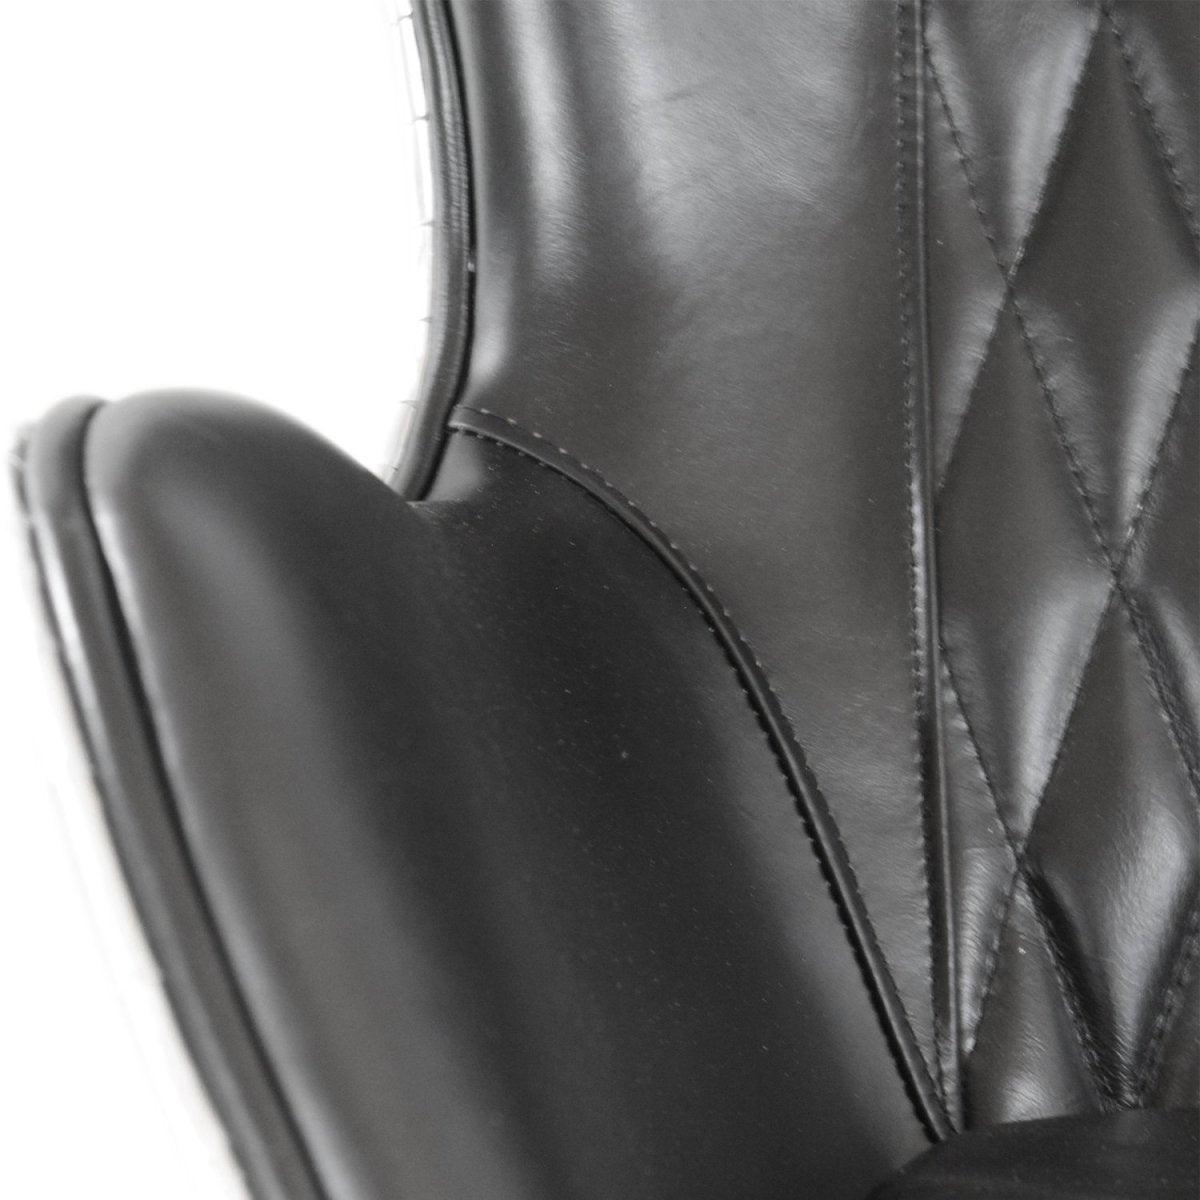 Aviator Office Swan Chair - Casters - Genuine Black Leather - Aluminum